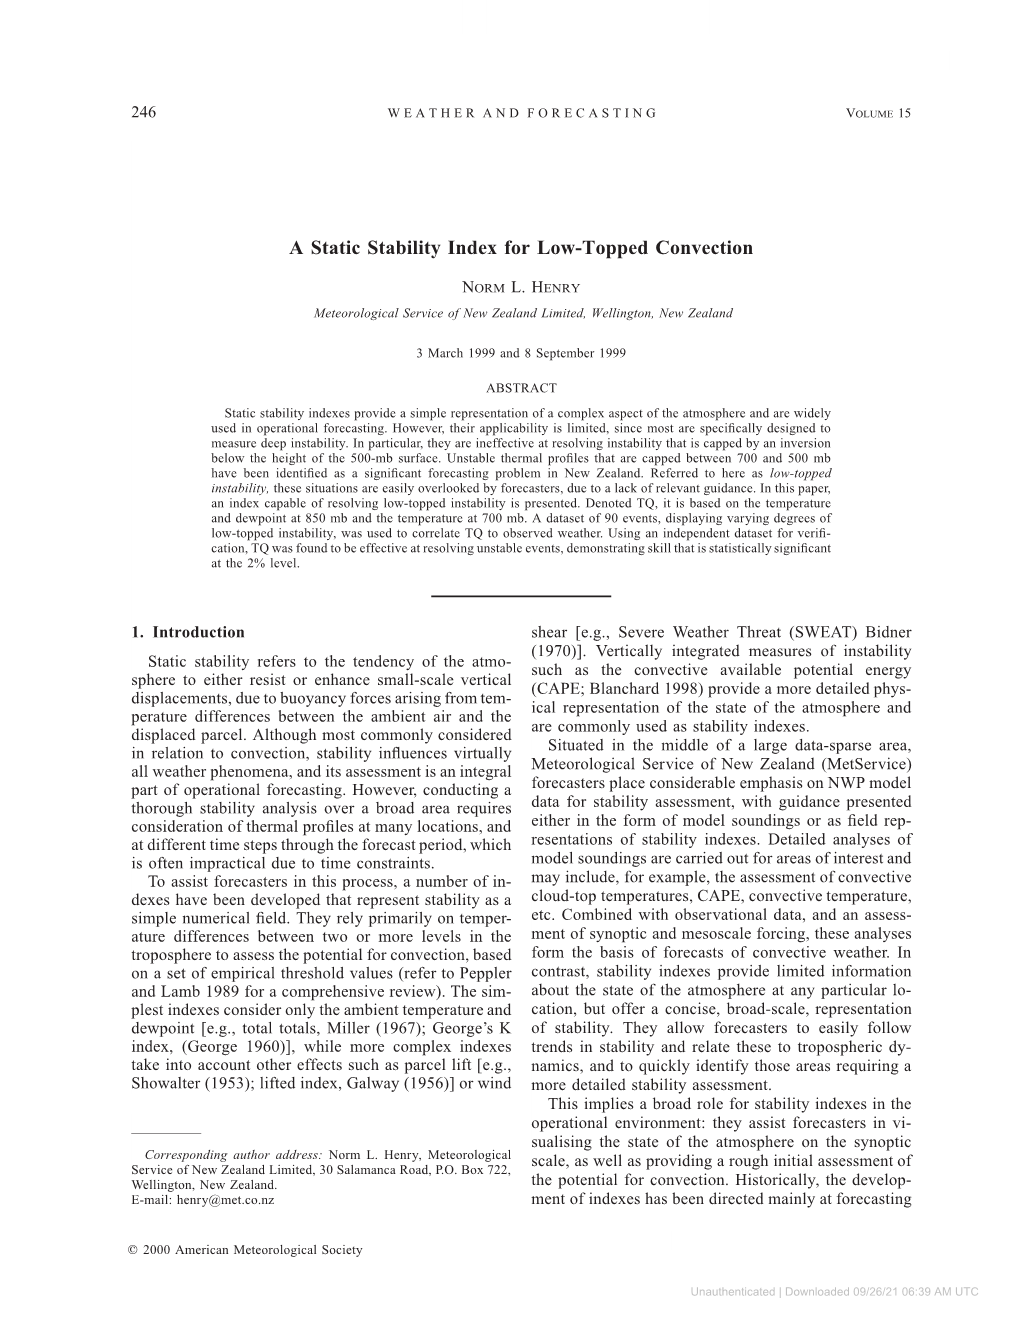 A Static Stability Index for Low-Topped Convection